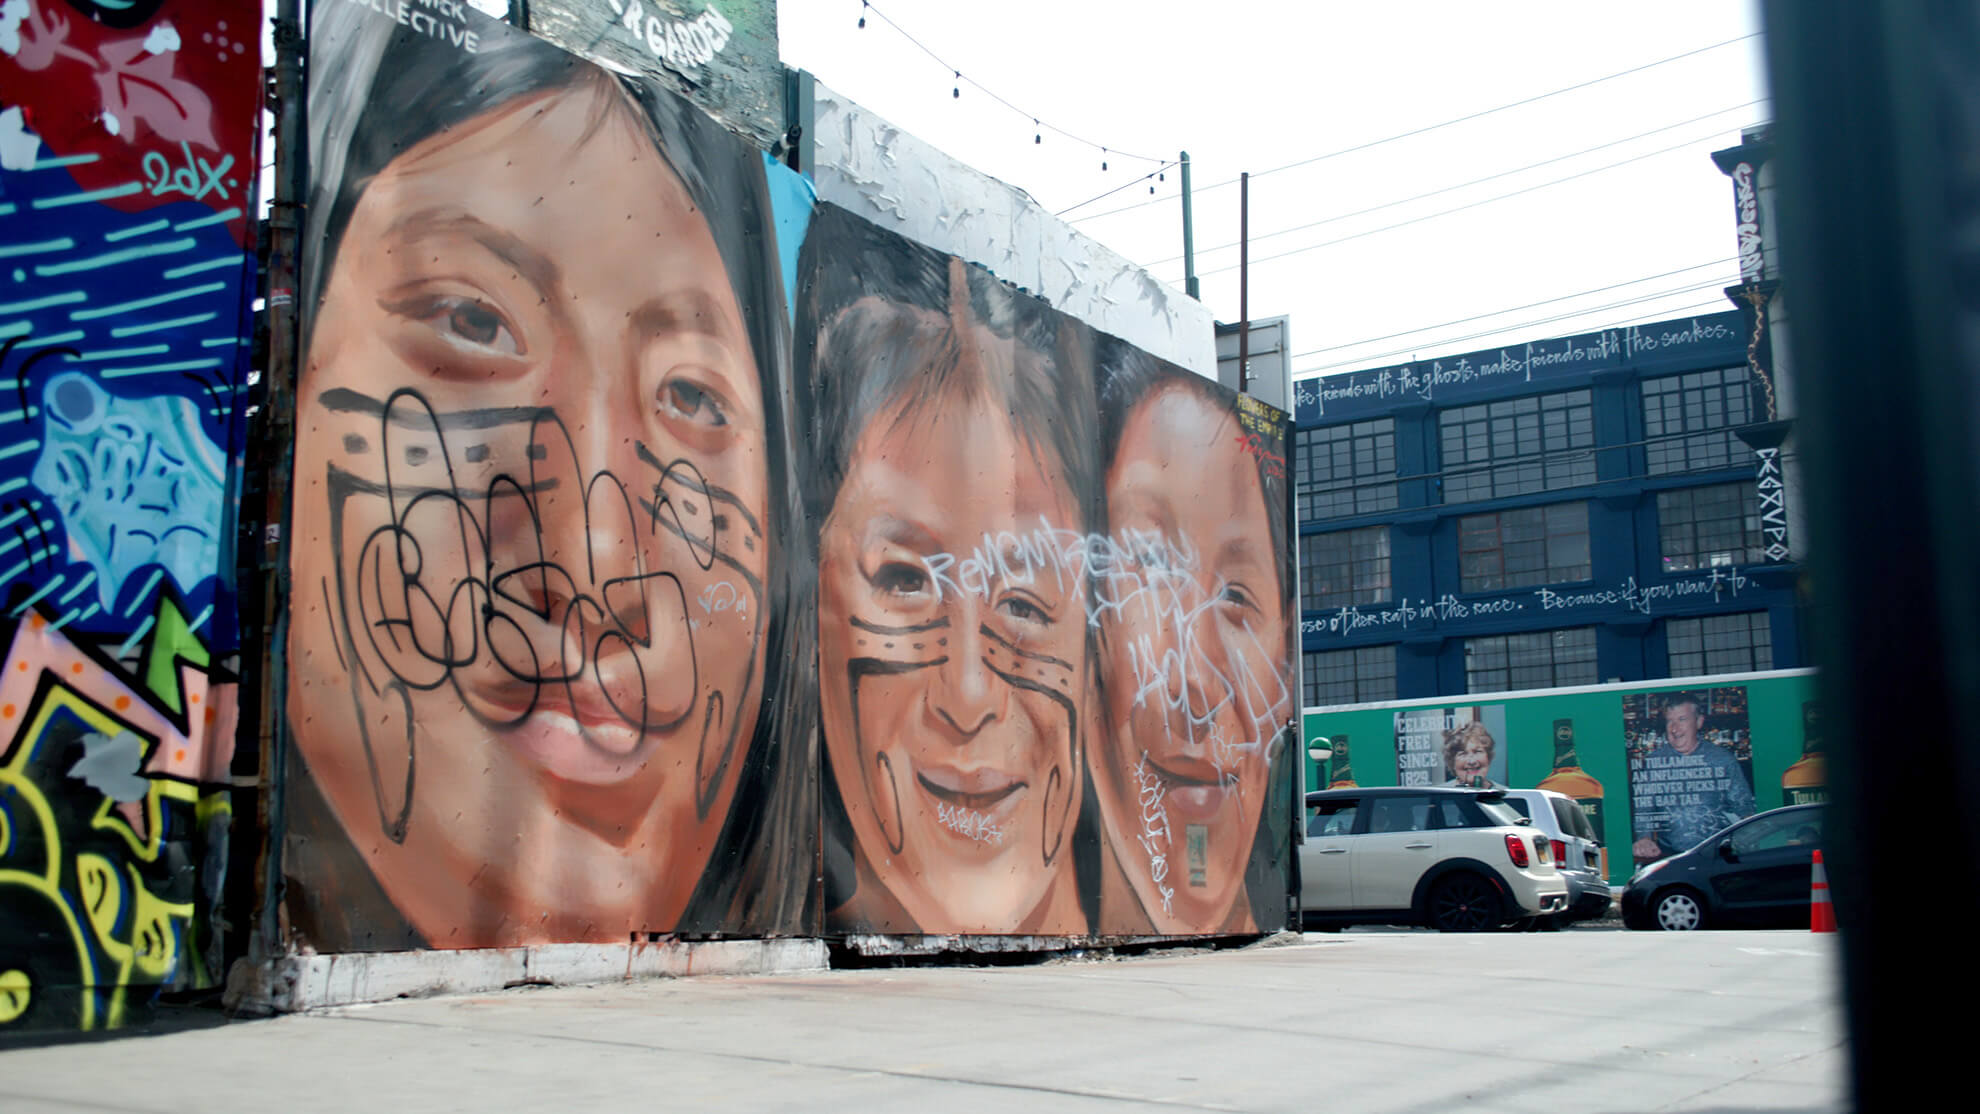 An angled shot of the mural before it was mended. Graffiti has been drawn over all of the faces, obscuring them.